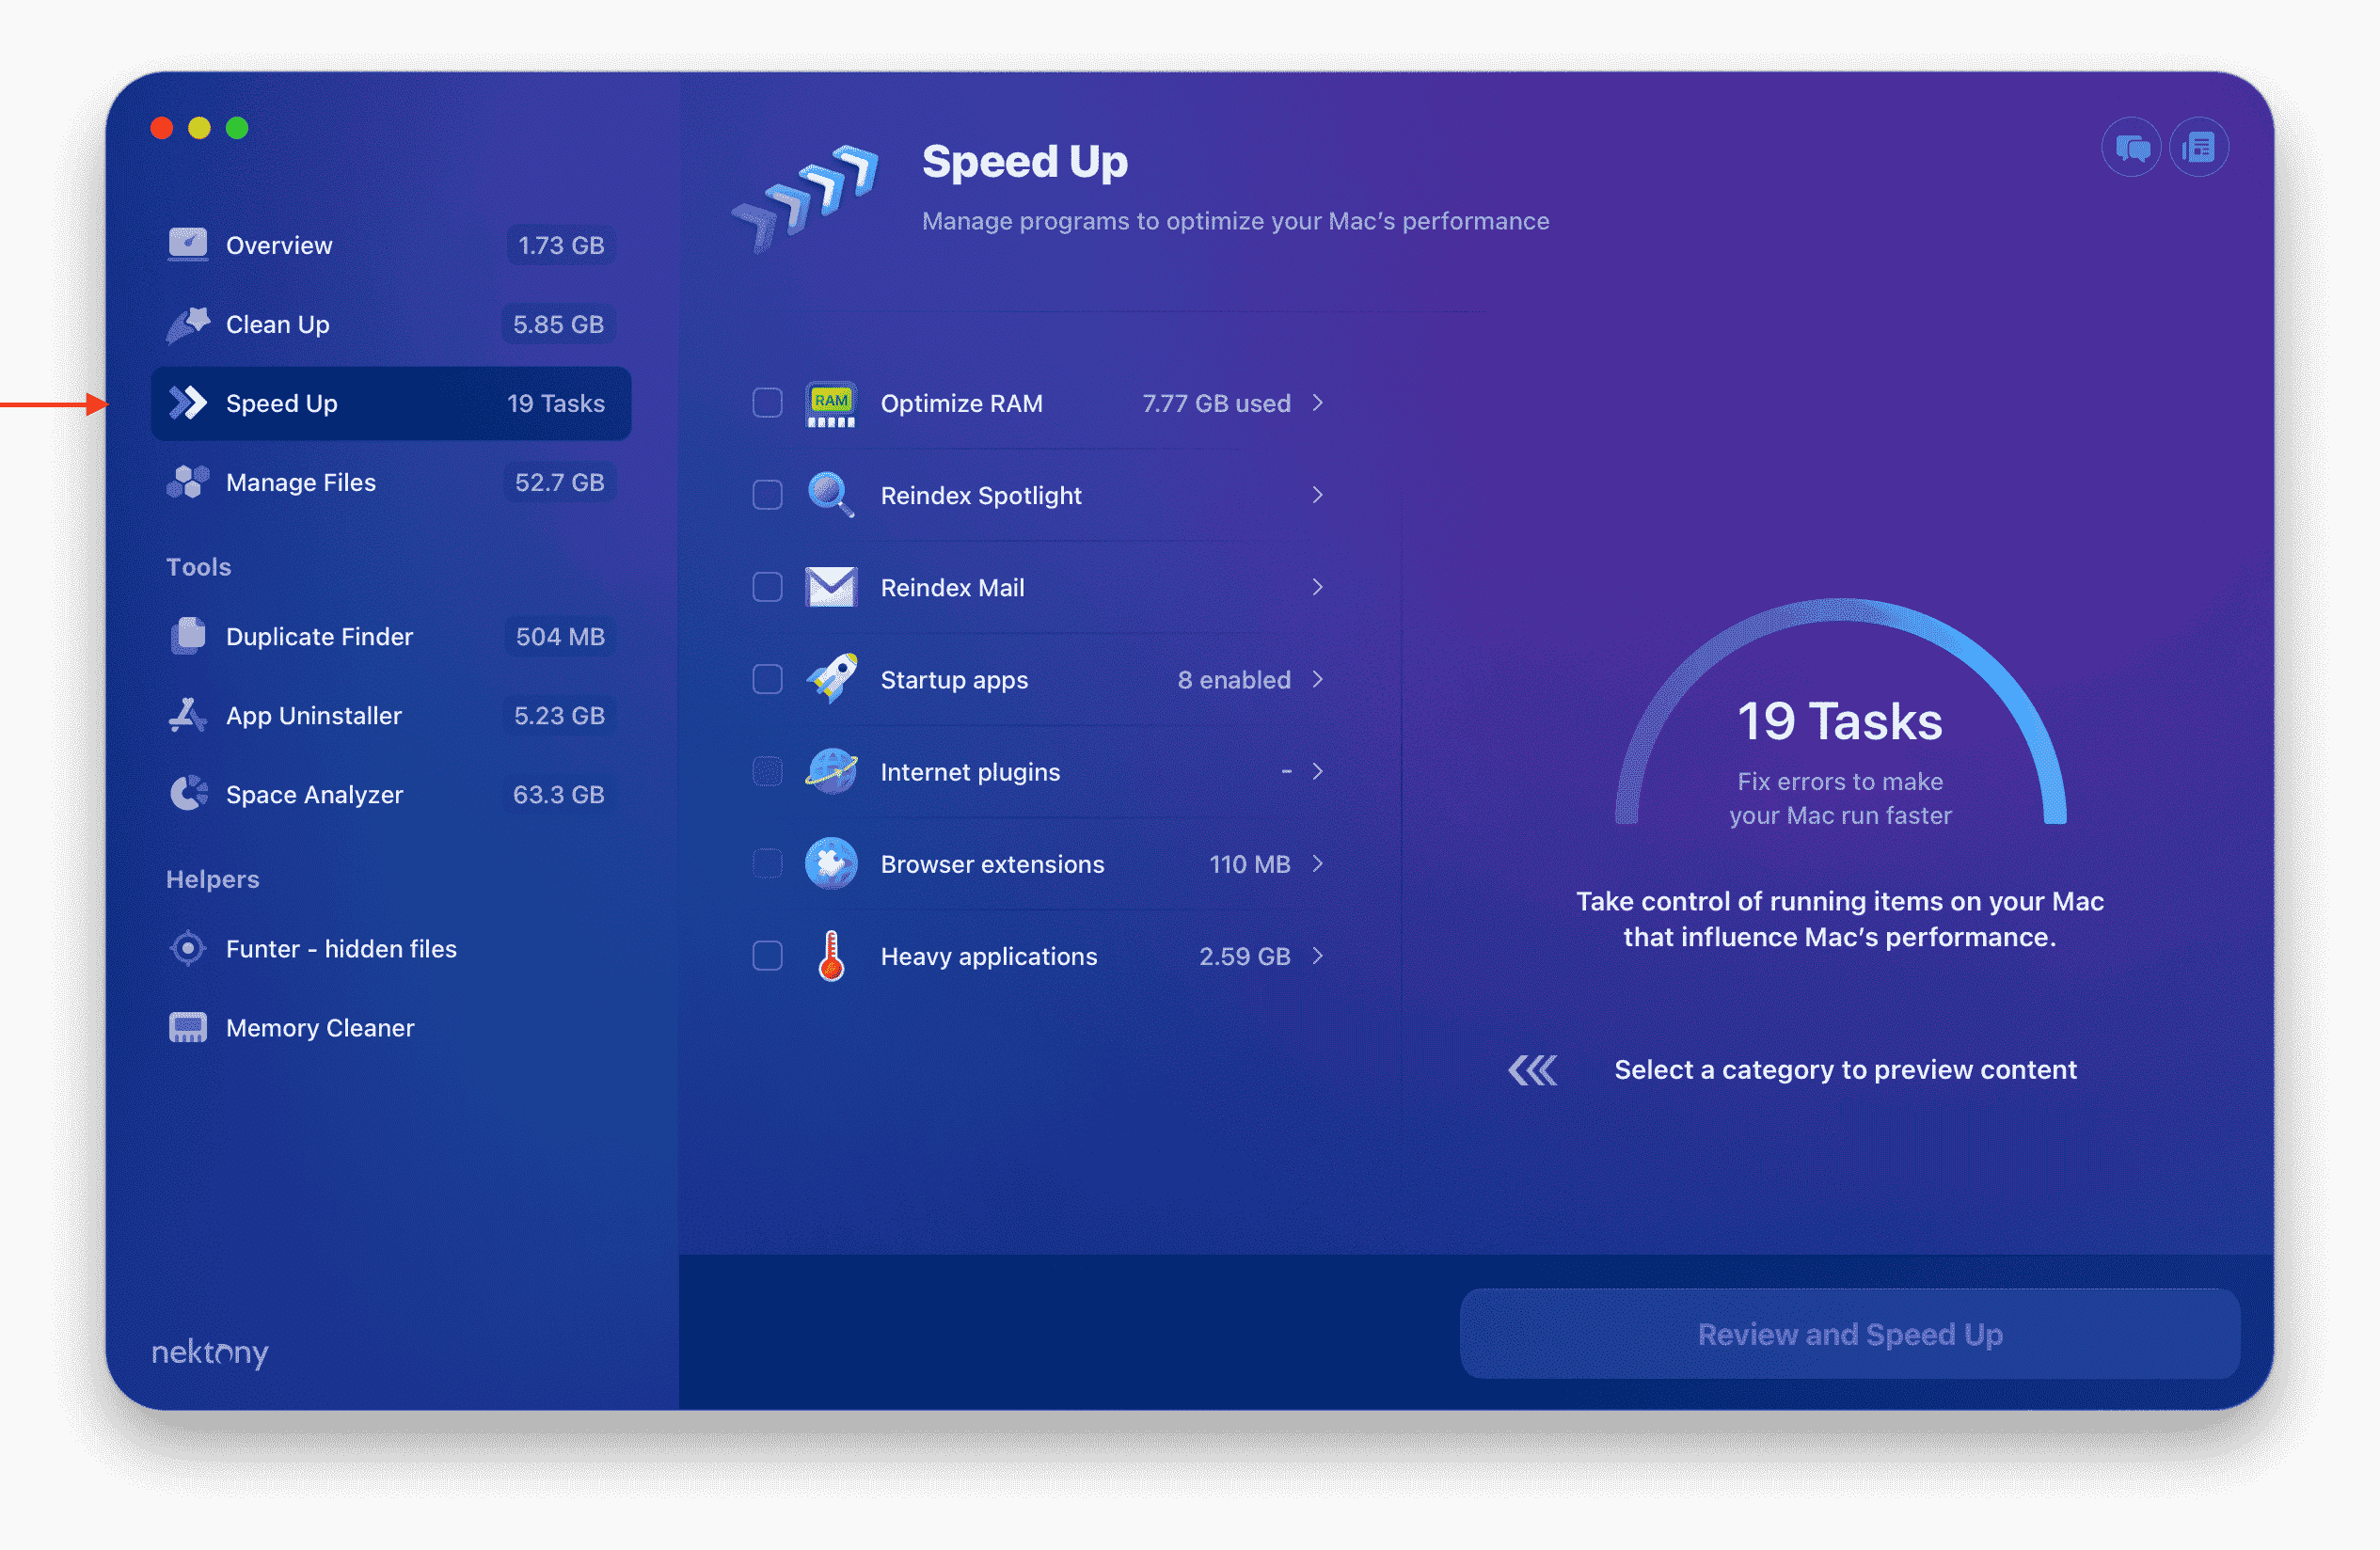 maccleaner pro showing the speed up section